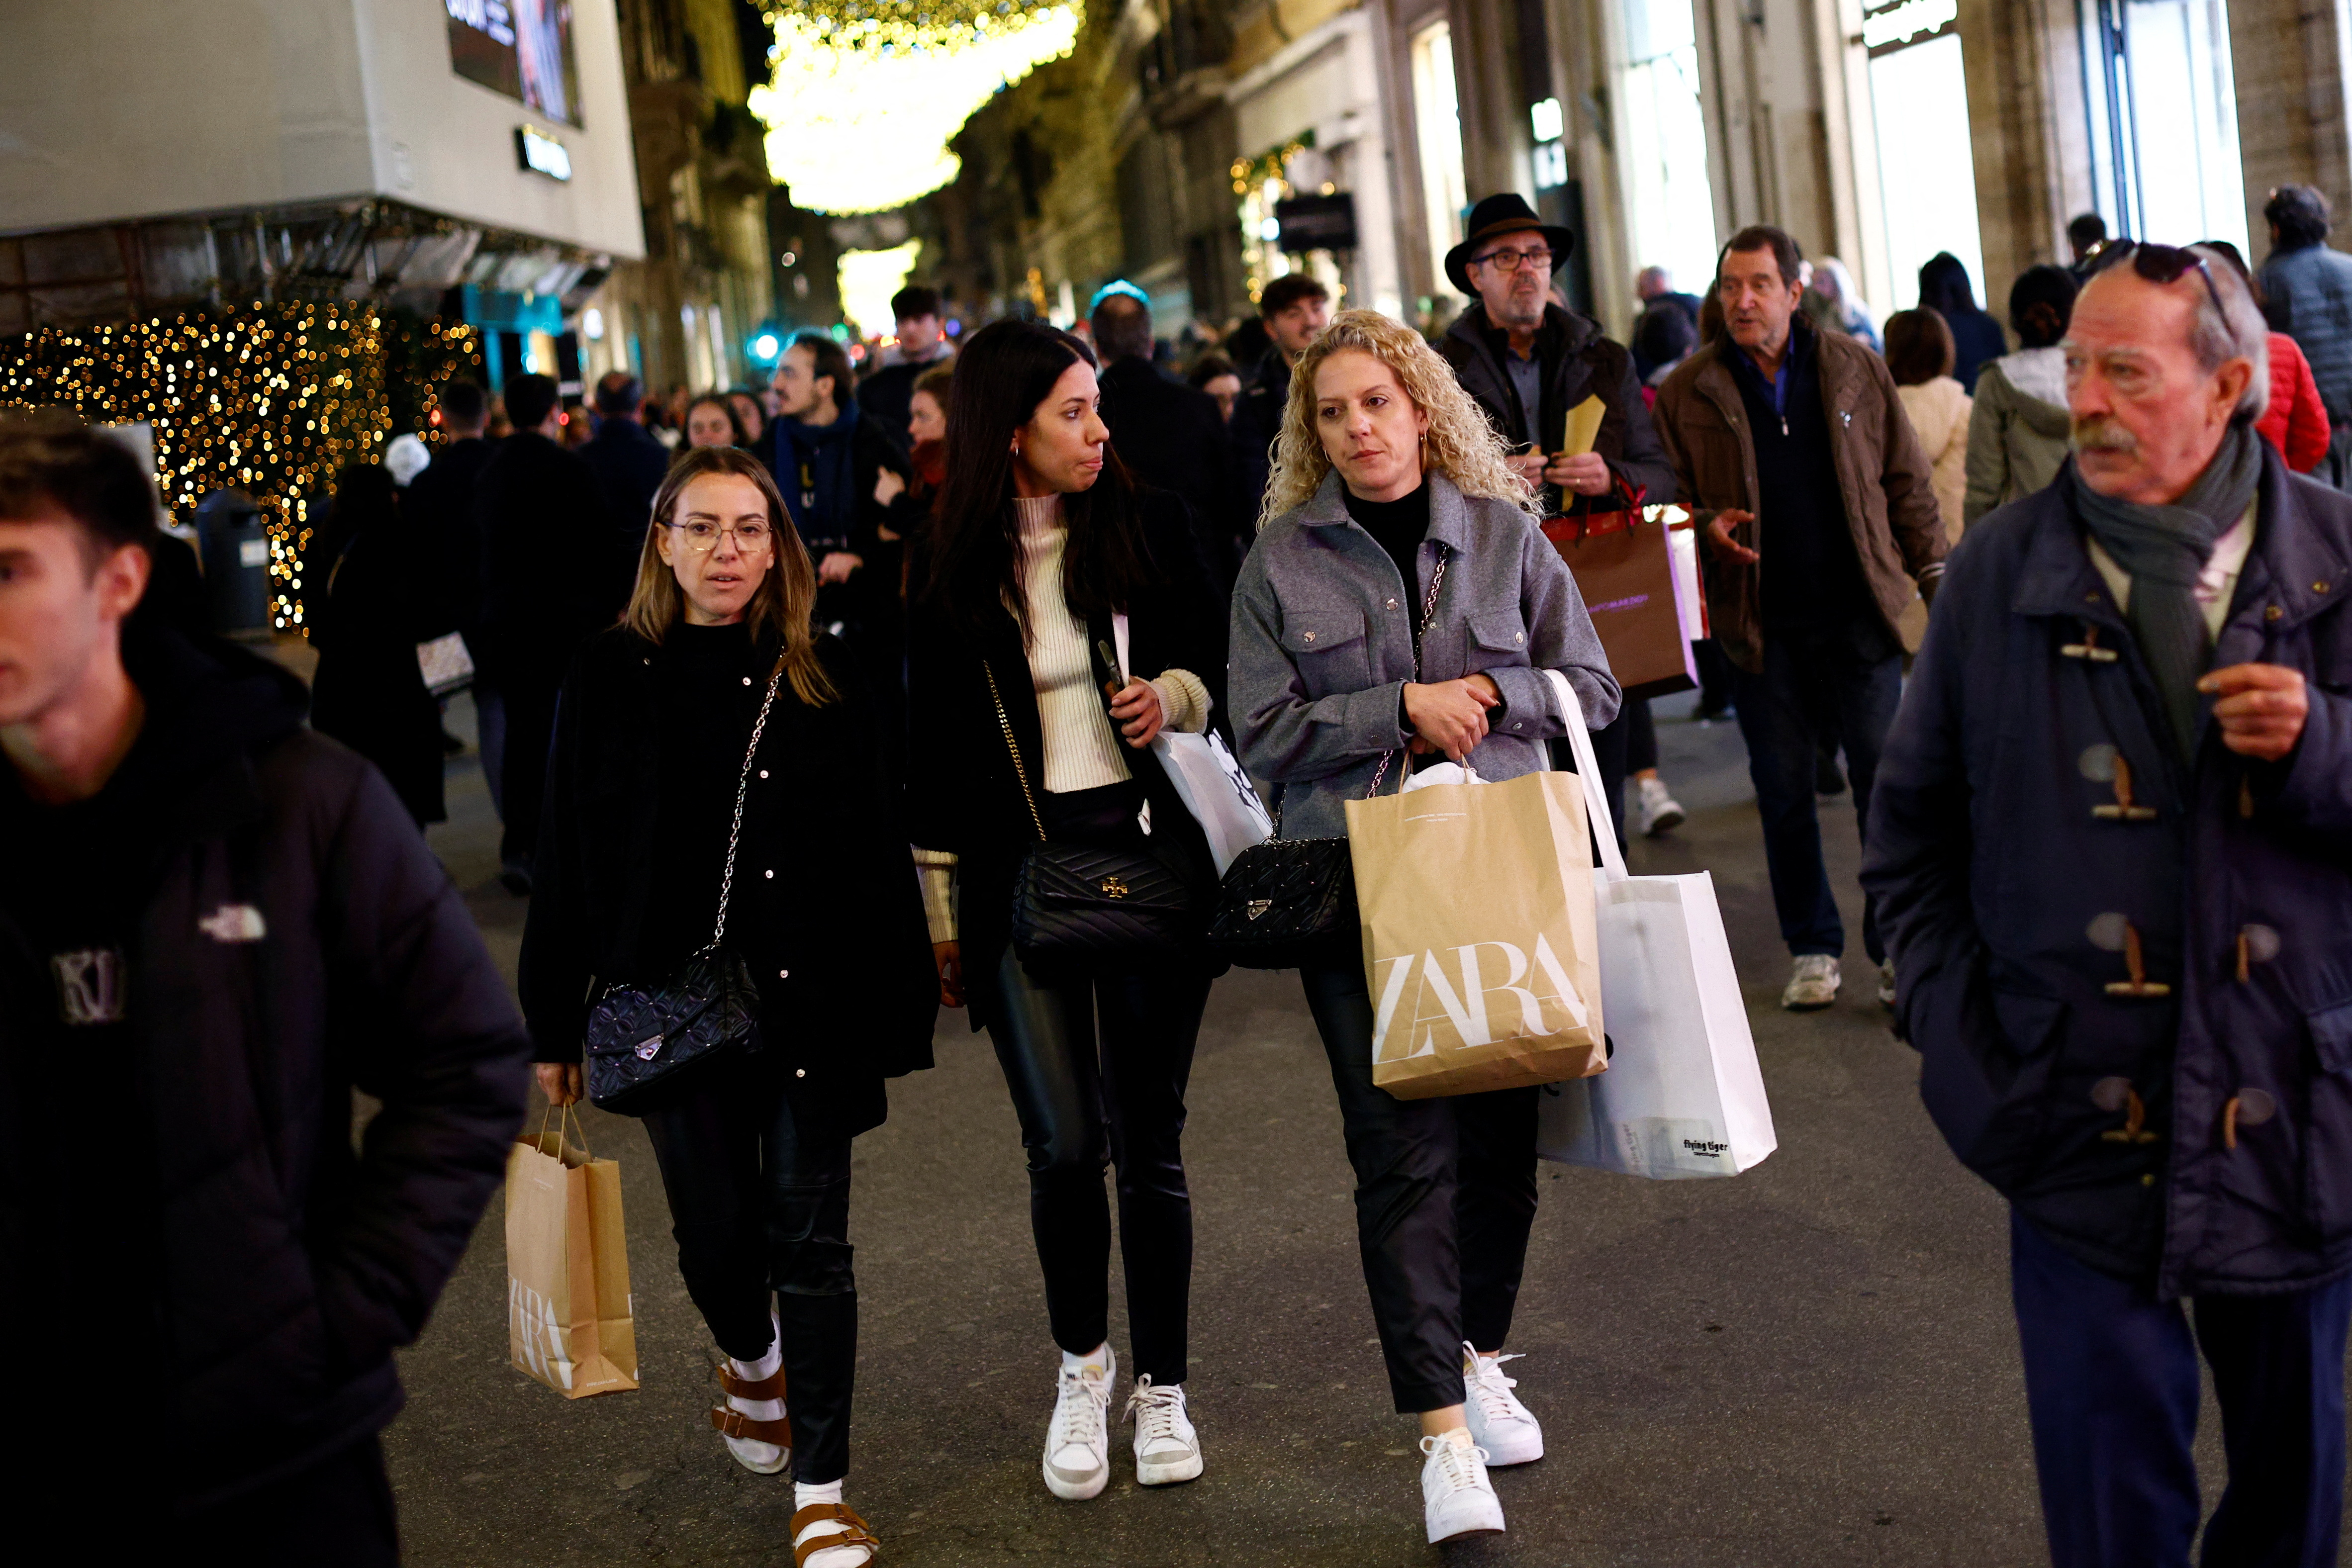 People make the most of shopping in Rome ahead of Christmas